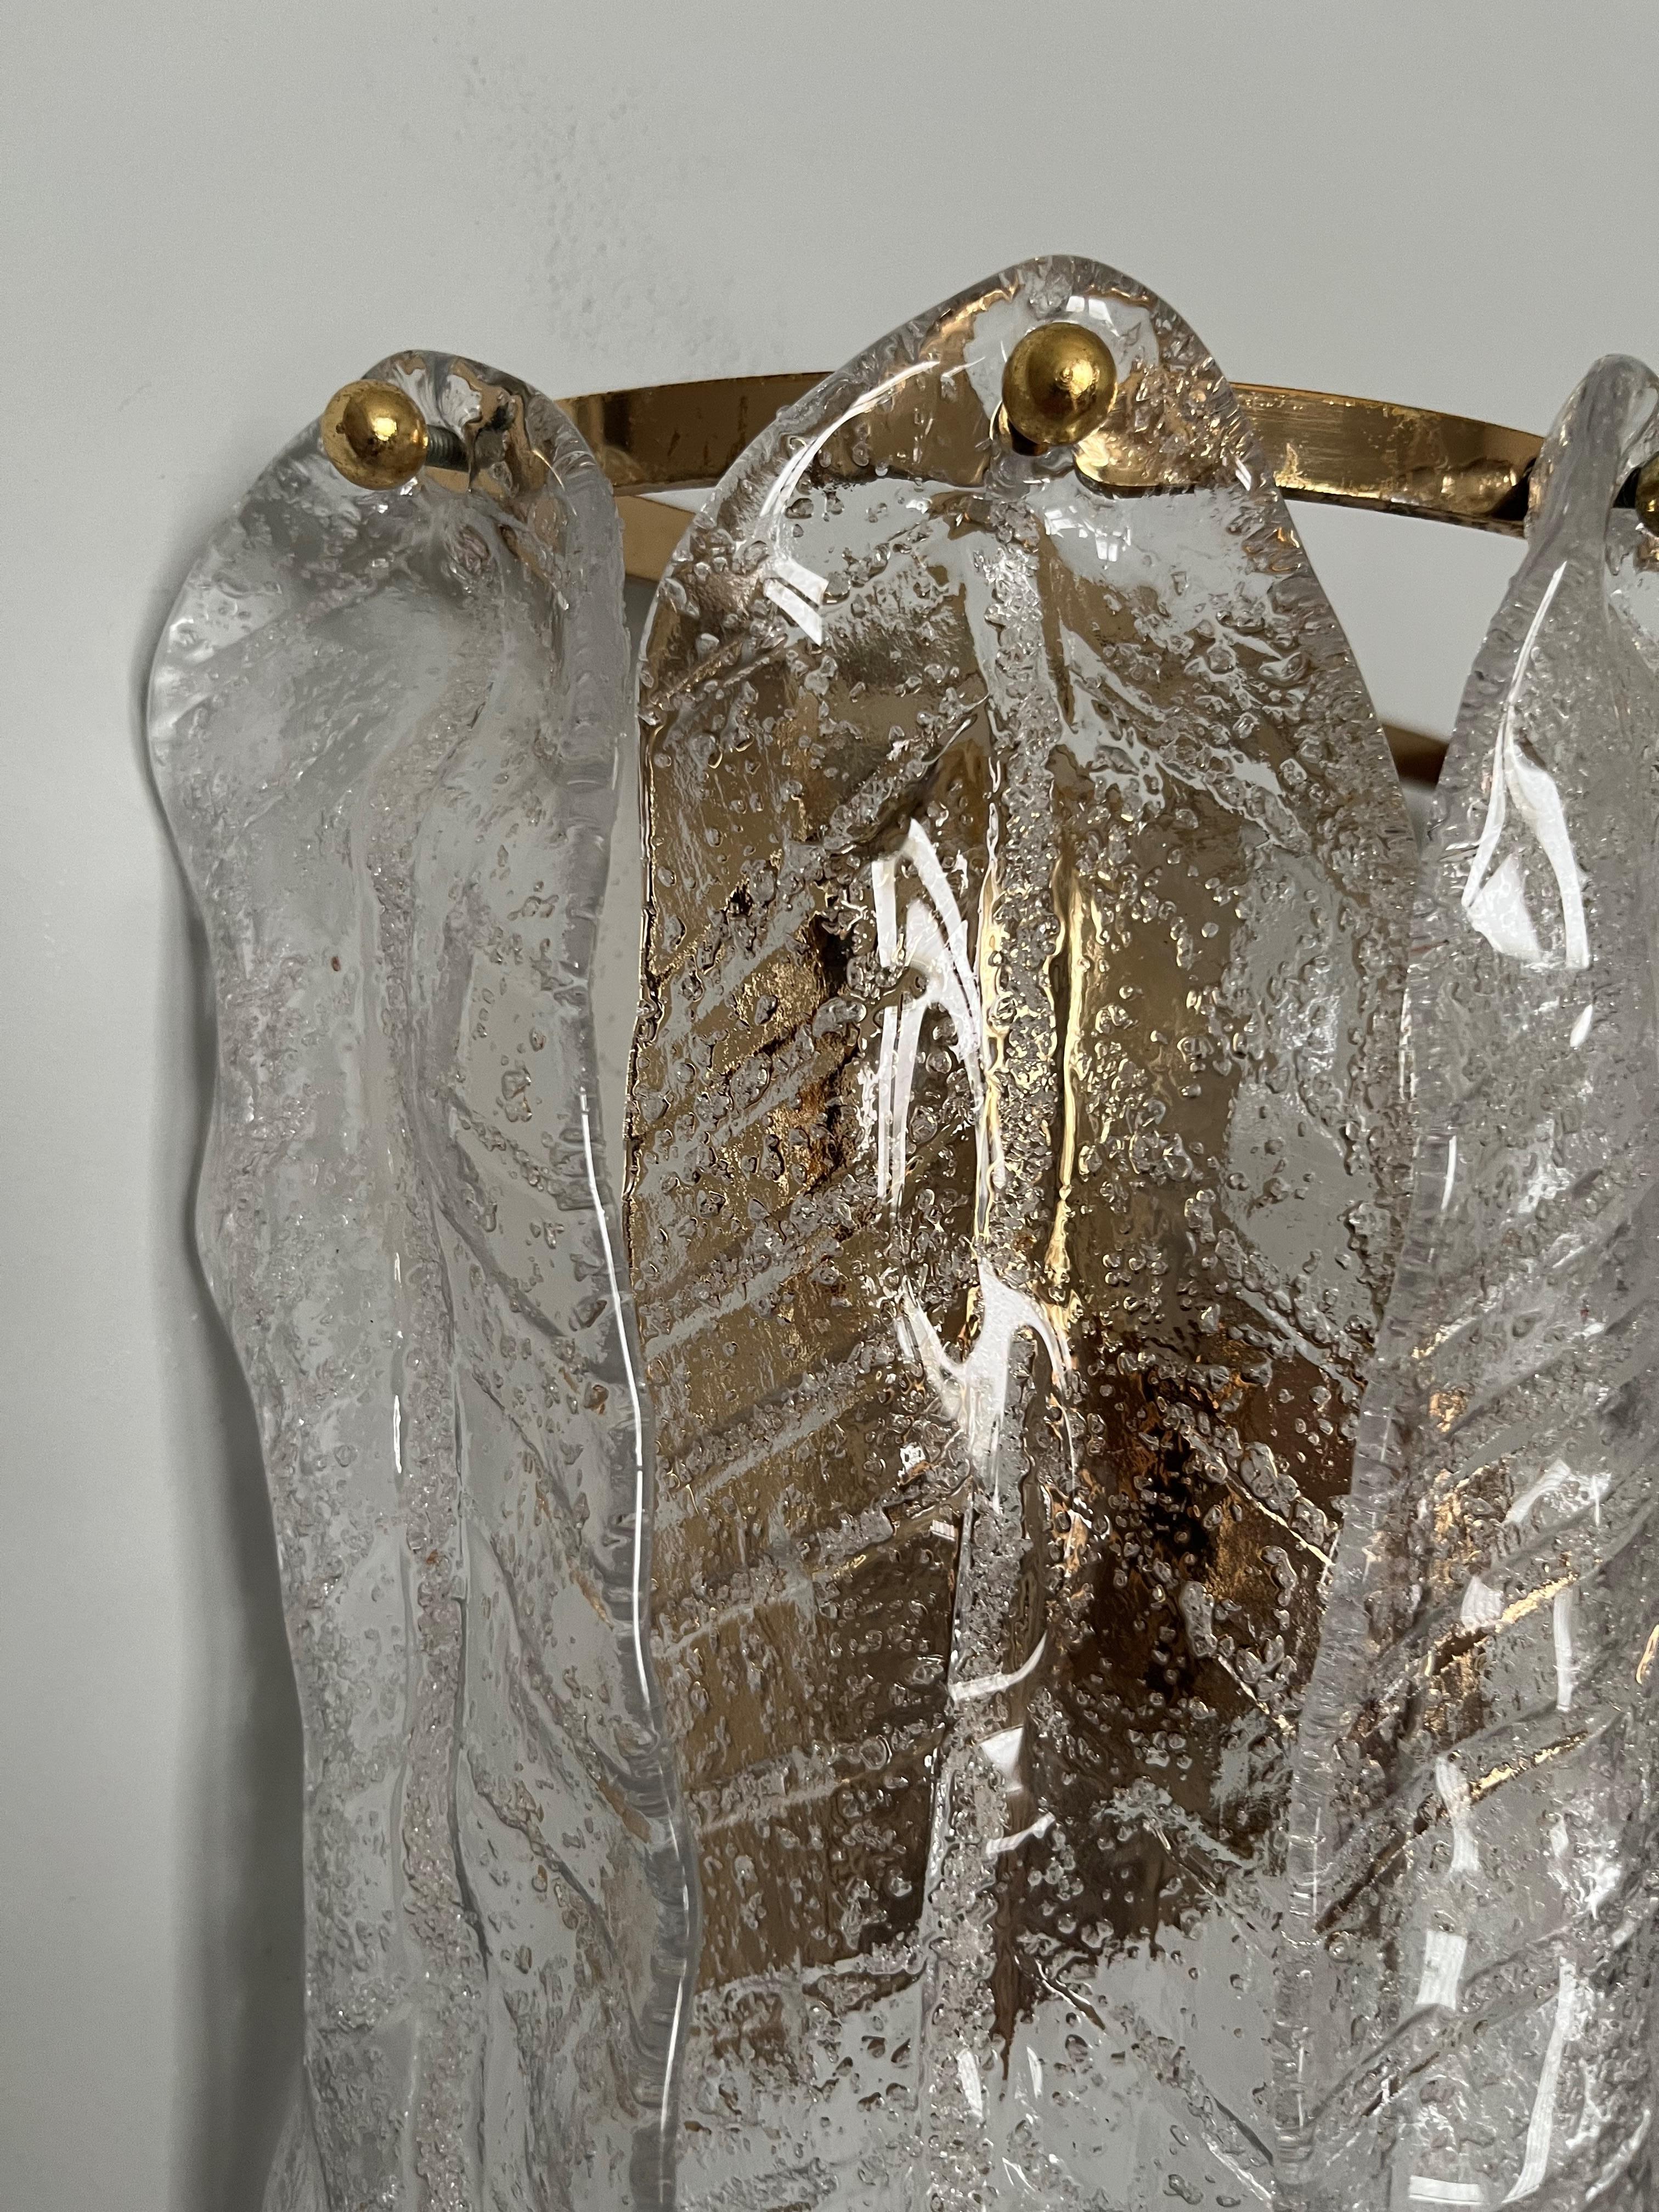 Stunning set of four Italian clear Murano glass leaf Wall Sconces from 1970s. These fixtures were made during the 1970s in Italy.
Each wall sconce is composed by 6 units of Murano glasses and brass structure.
Each sconce is equipped with 2 light